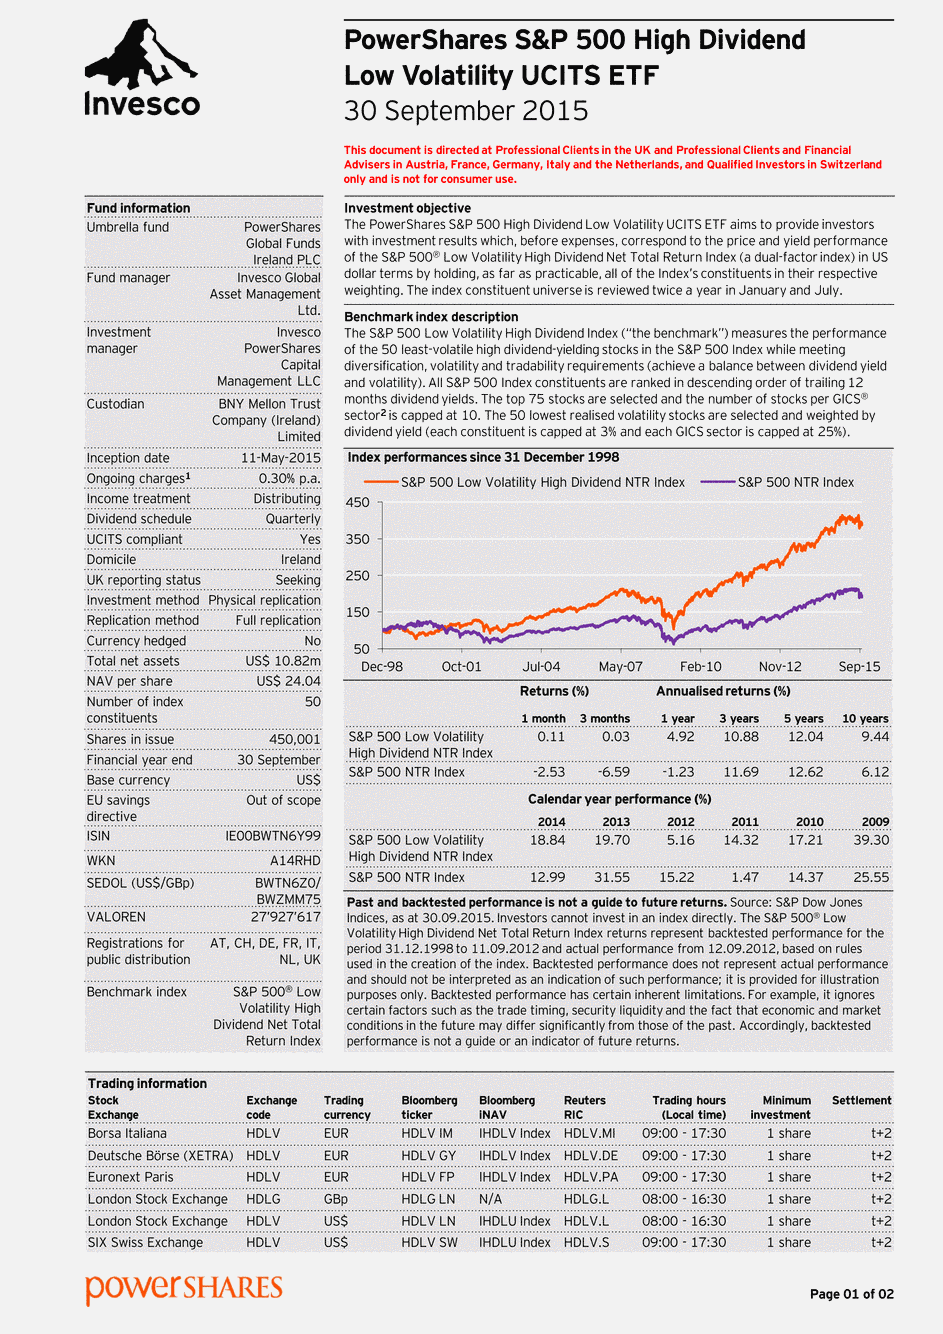 Reporting Invesco Mark. III plc - S&P 500 High Div. Low Vol. UCITS ETF - 30/09/2015 - Anglais